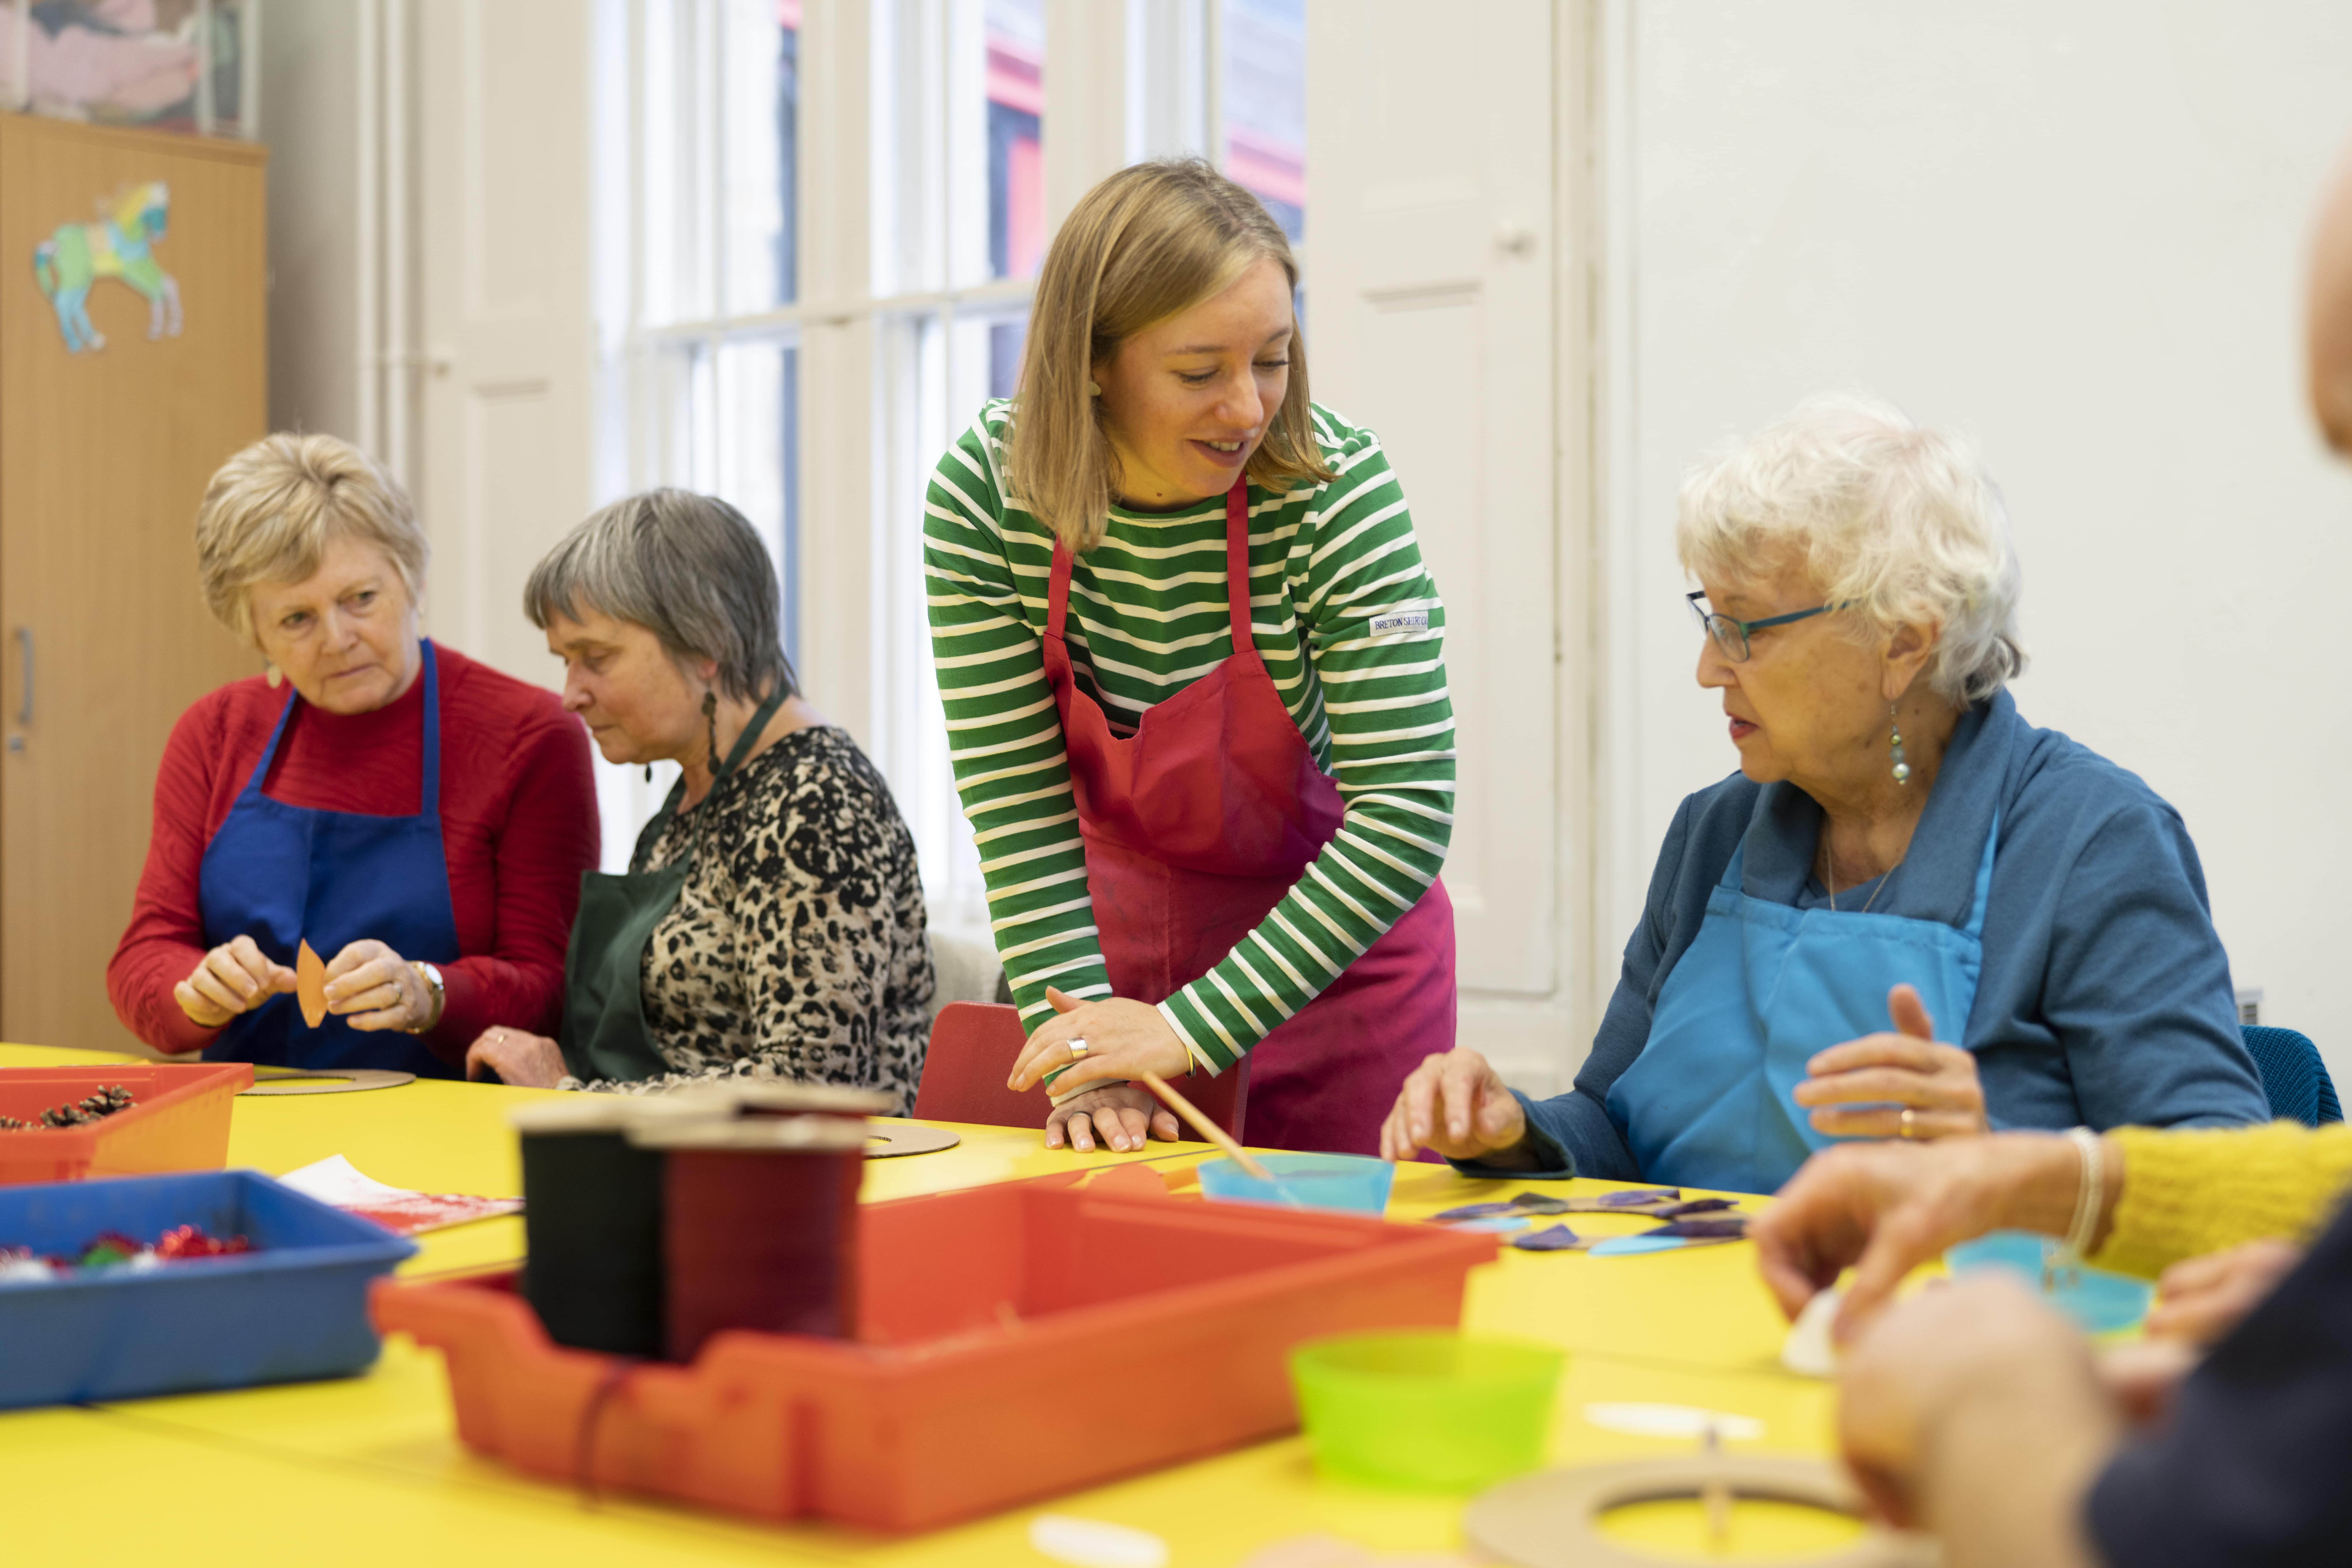 A group taking part in a craft activity at Creative Age